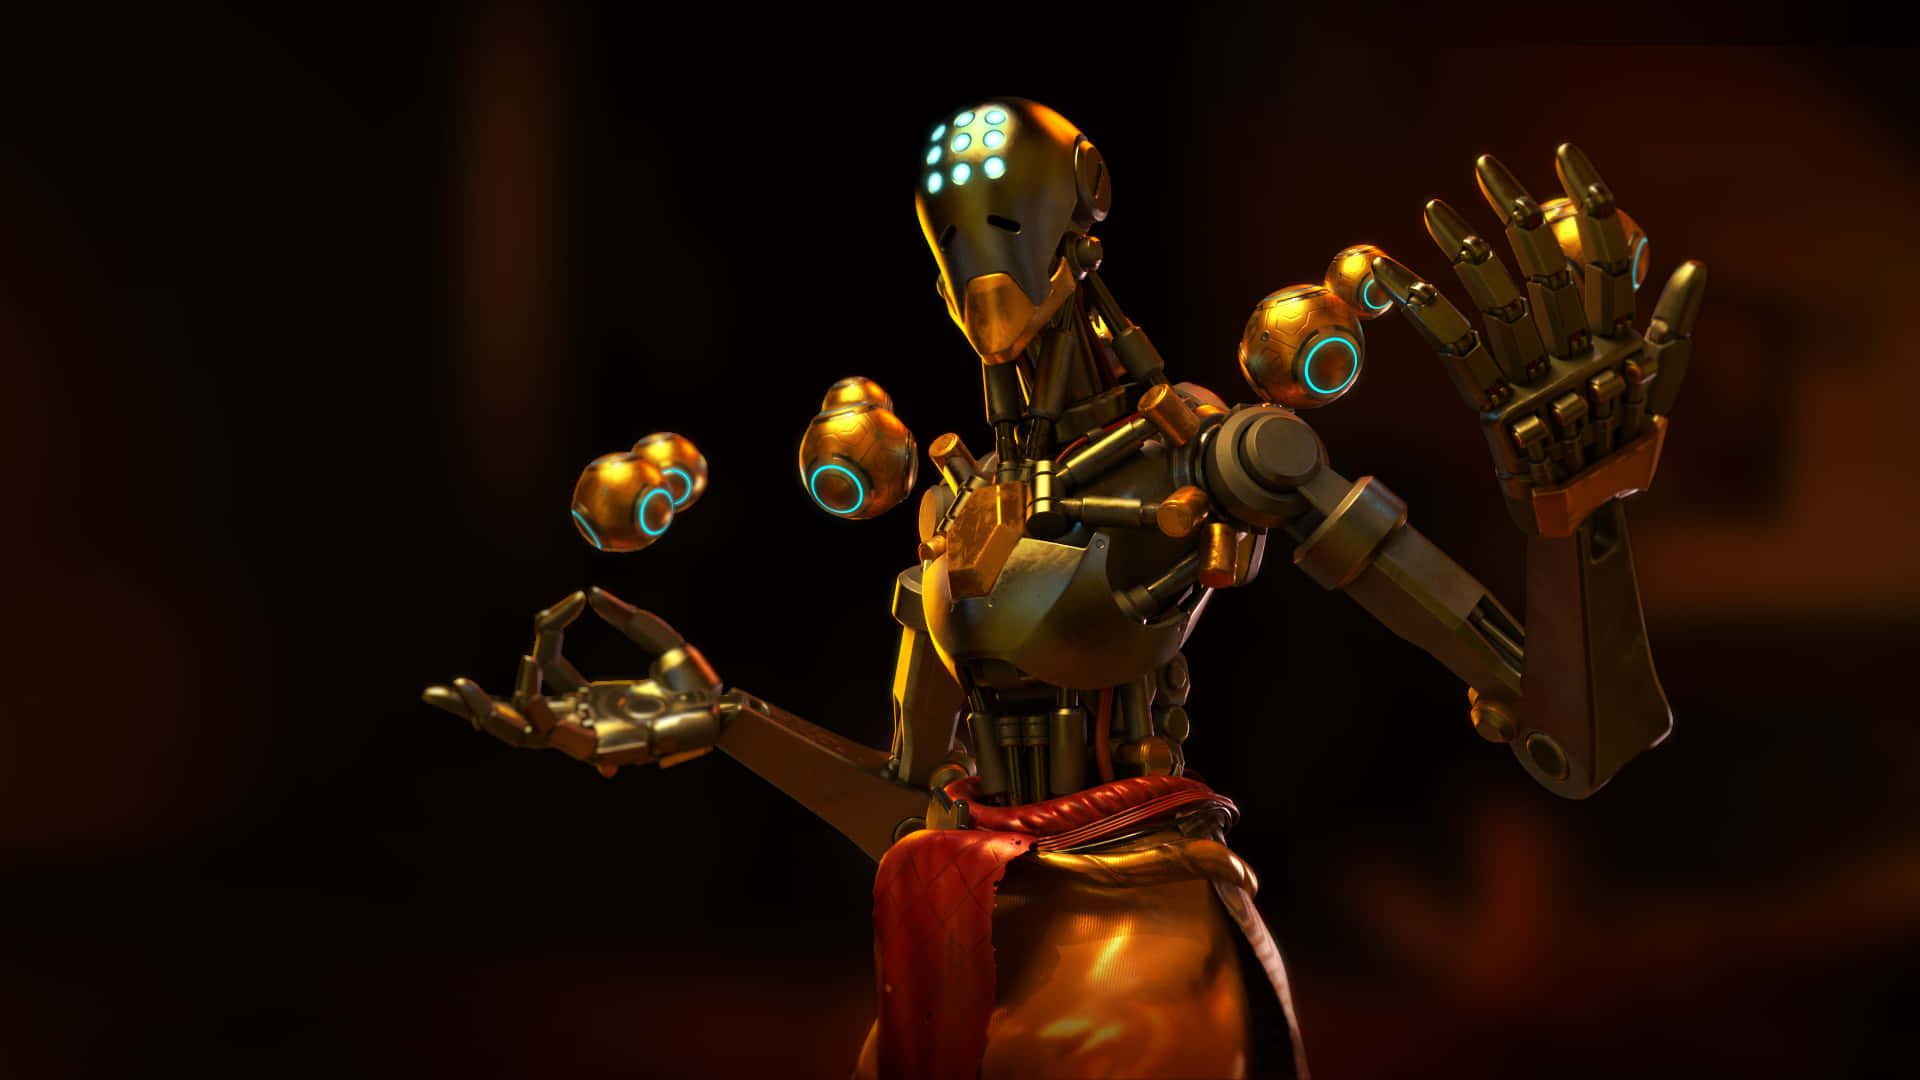 A Robot With A Golden Arm Is Holding A Sword Wallpaper